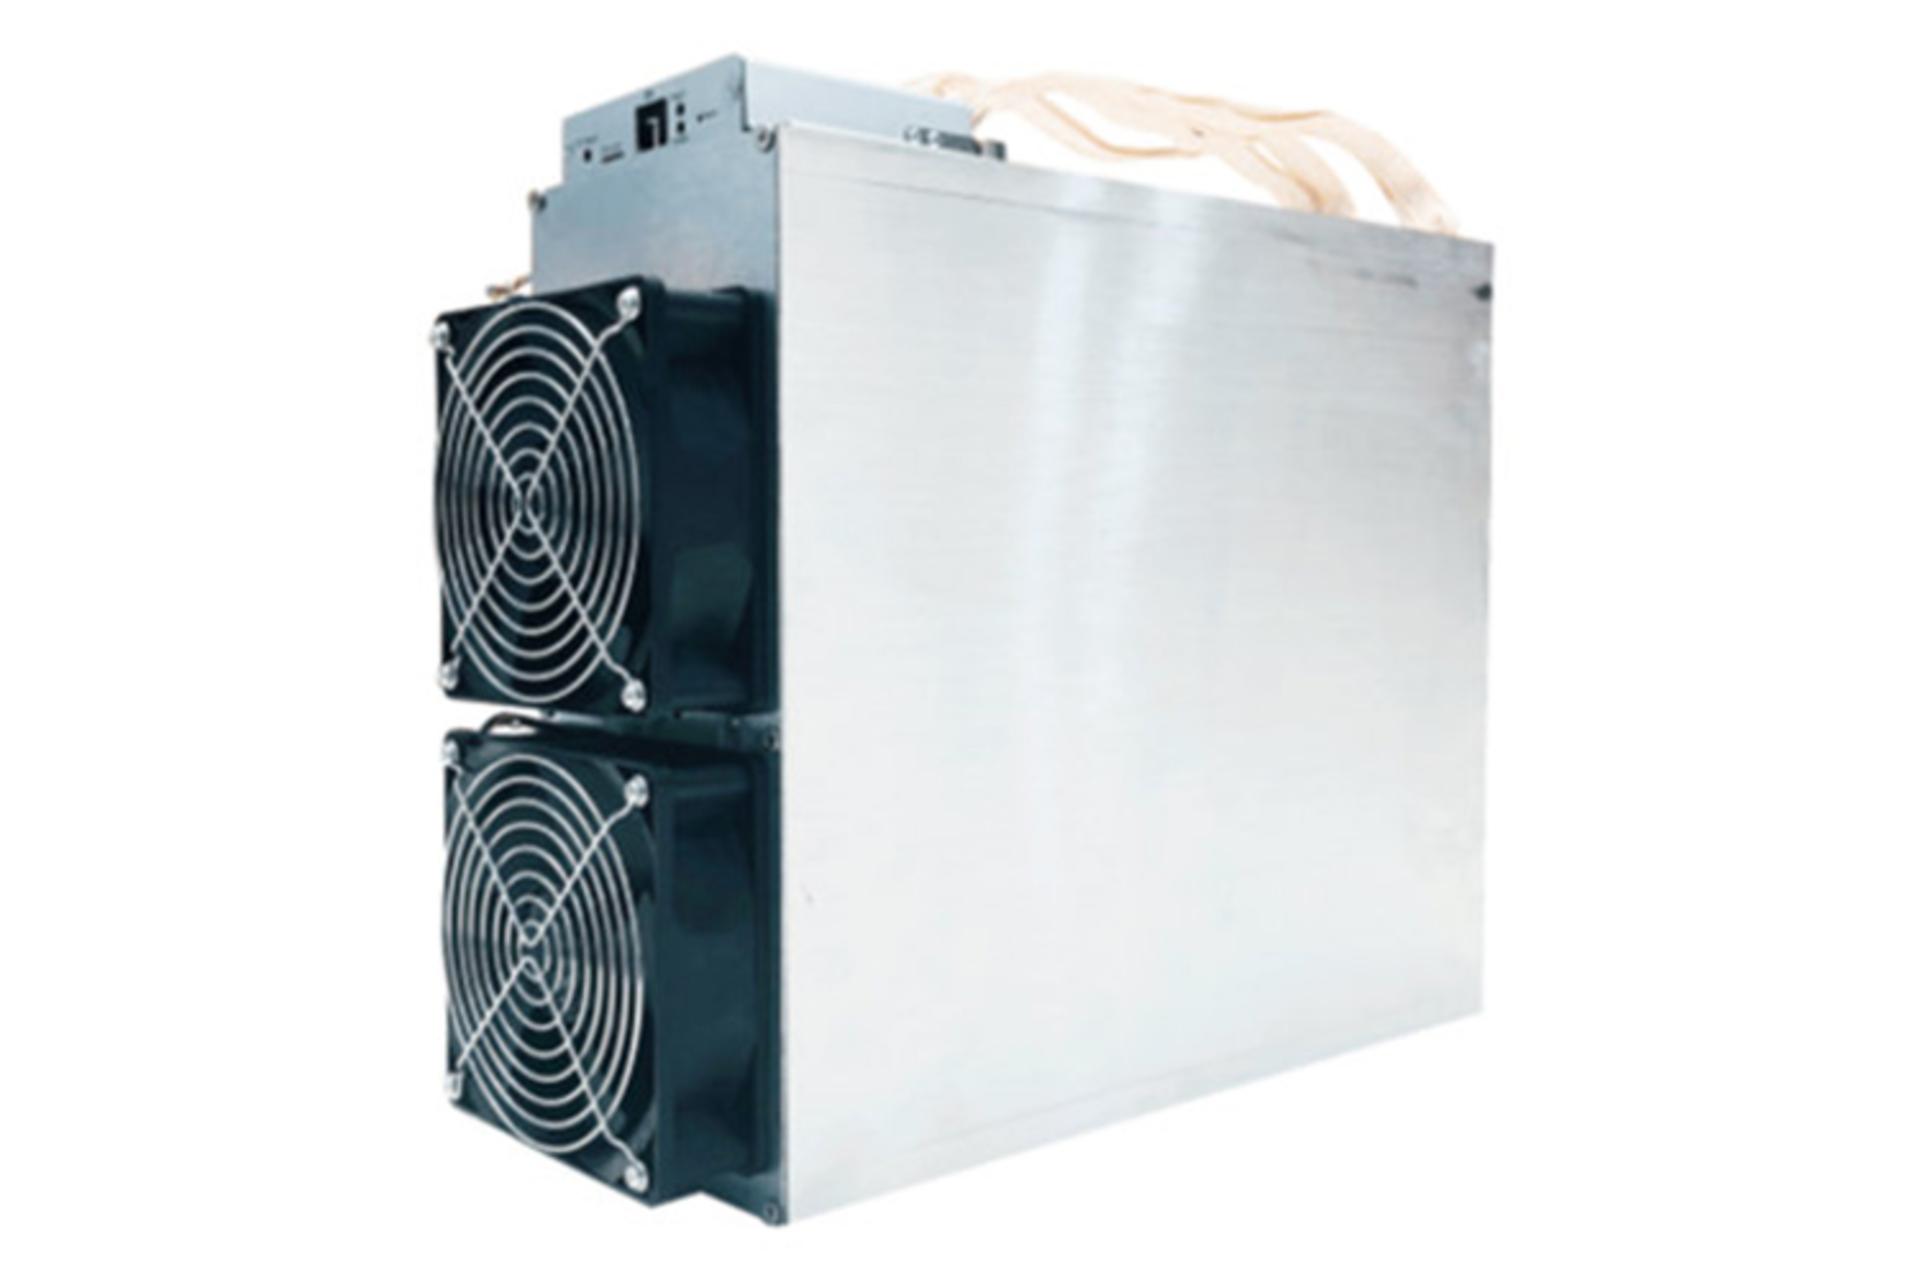 Antminer E3 / ماینر Antminer E3